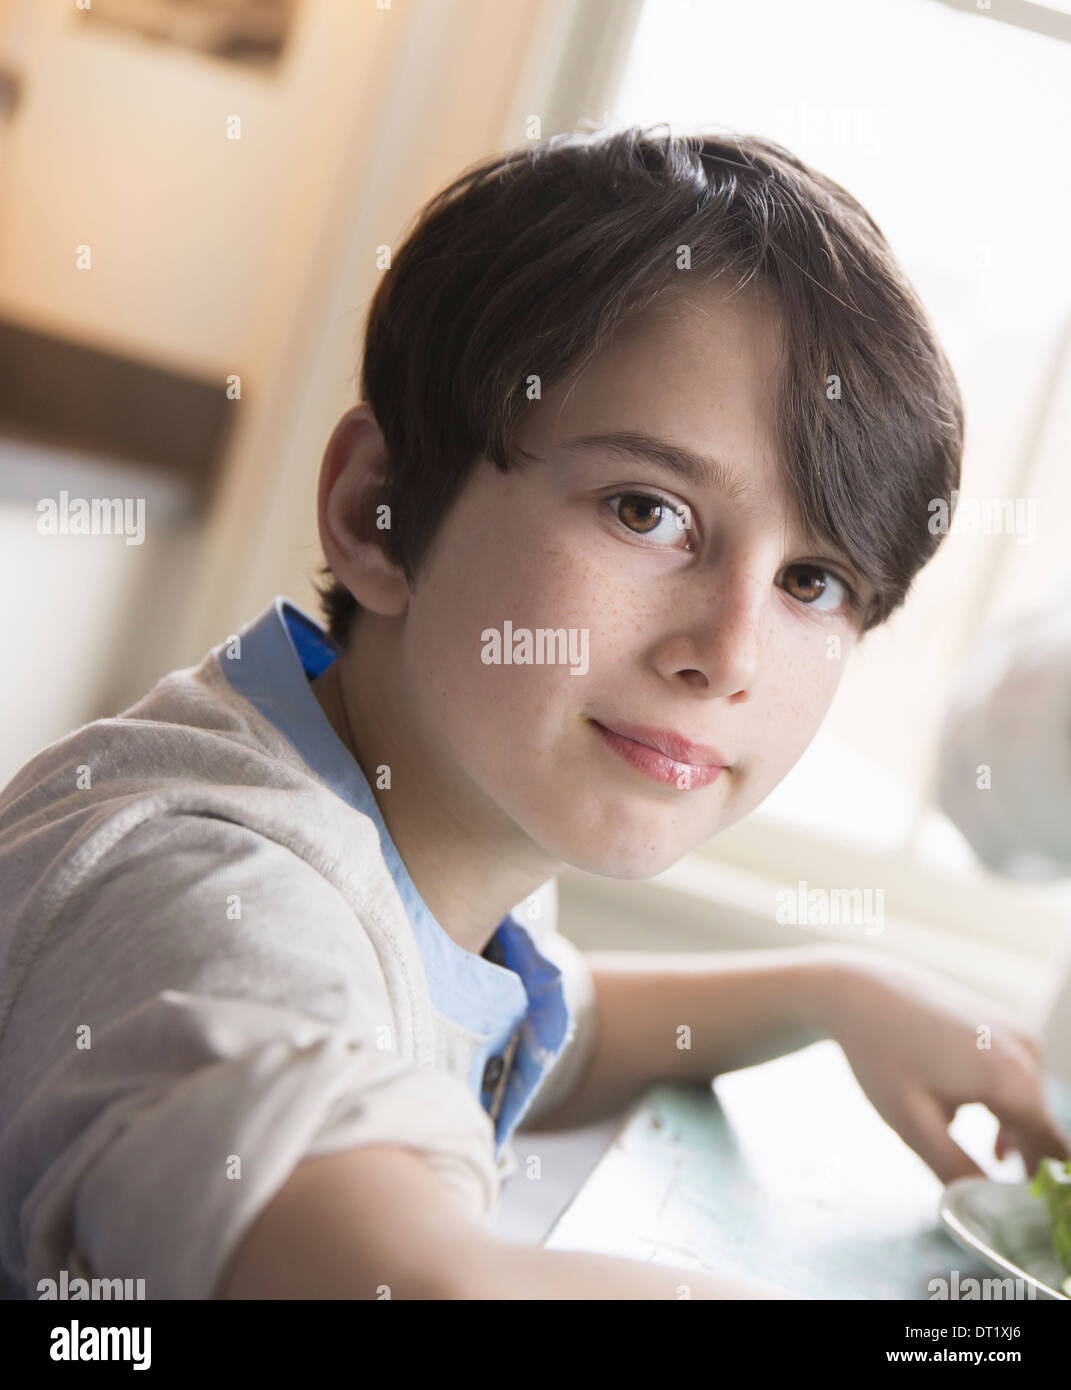 A child a young boy with brown hair and brown eyes sitting at the family table Stock Photo